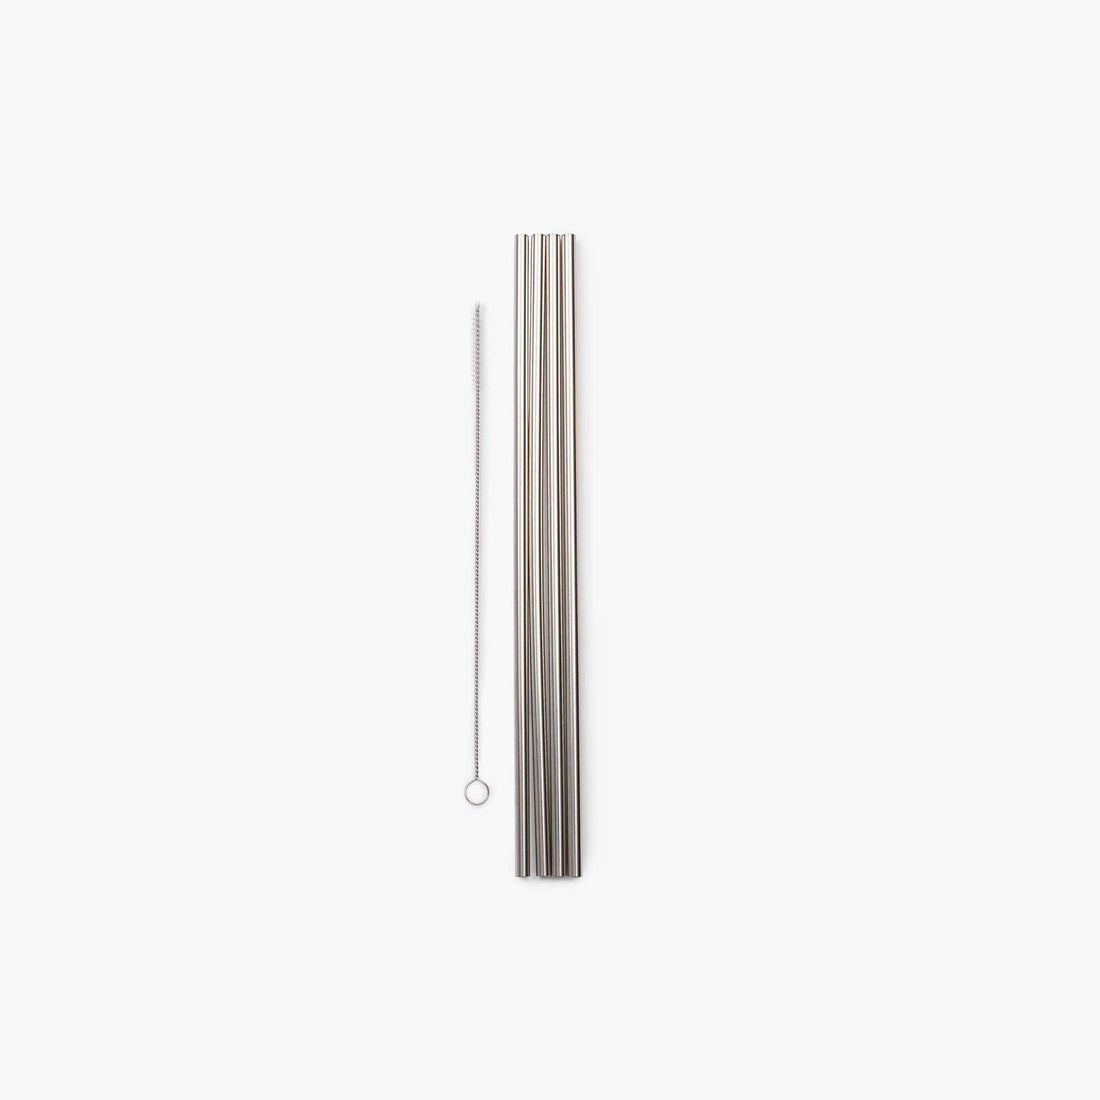 Reusable Metal Straws 4Pcs, Stainless Steel Straight Drinking